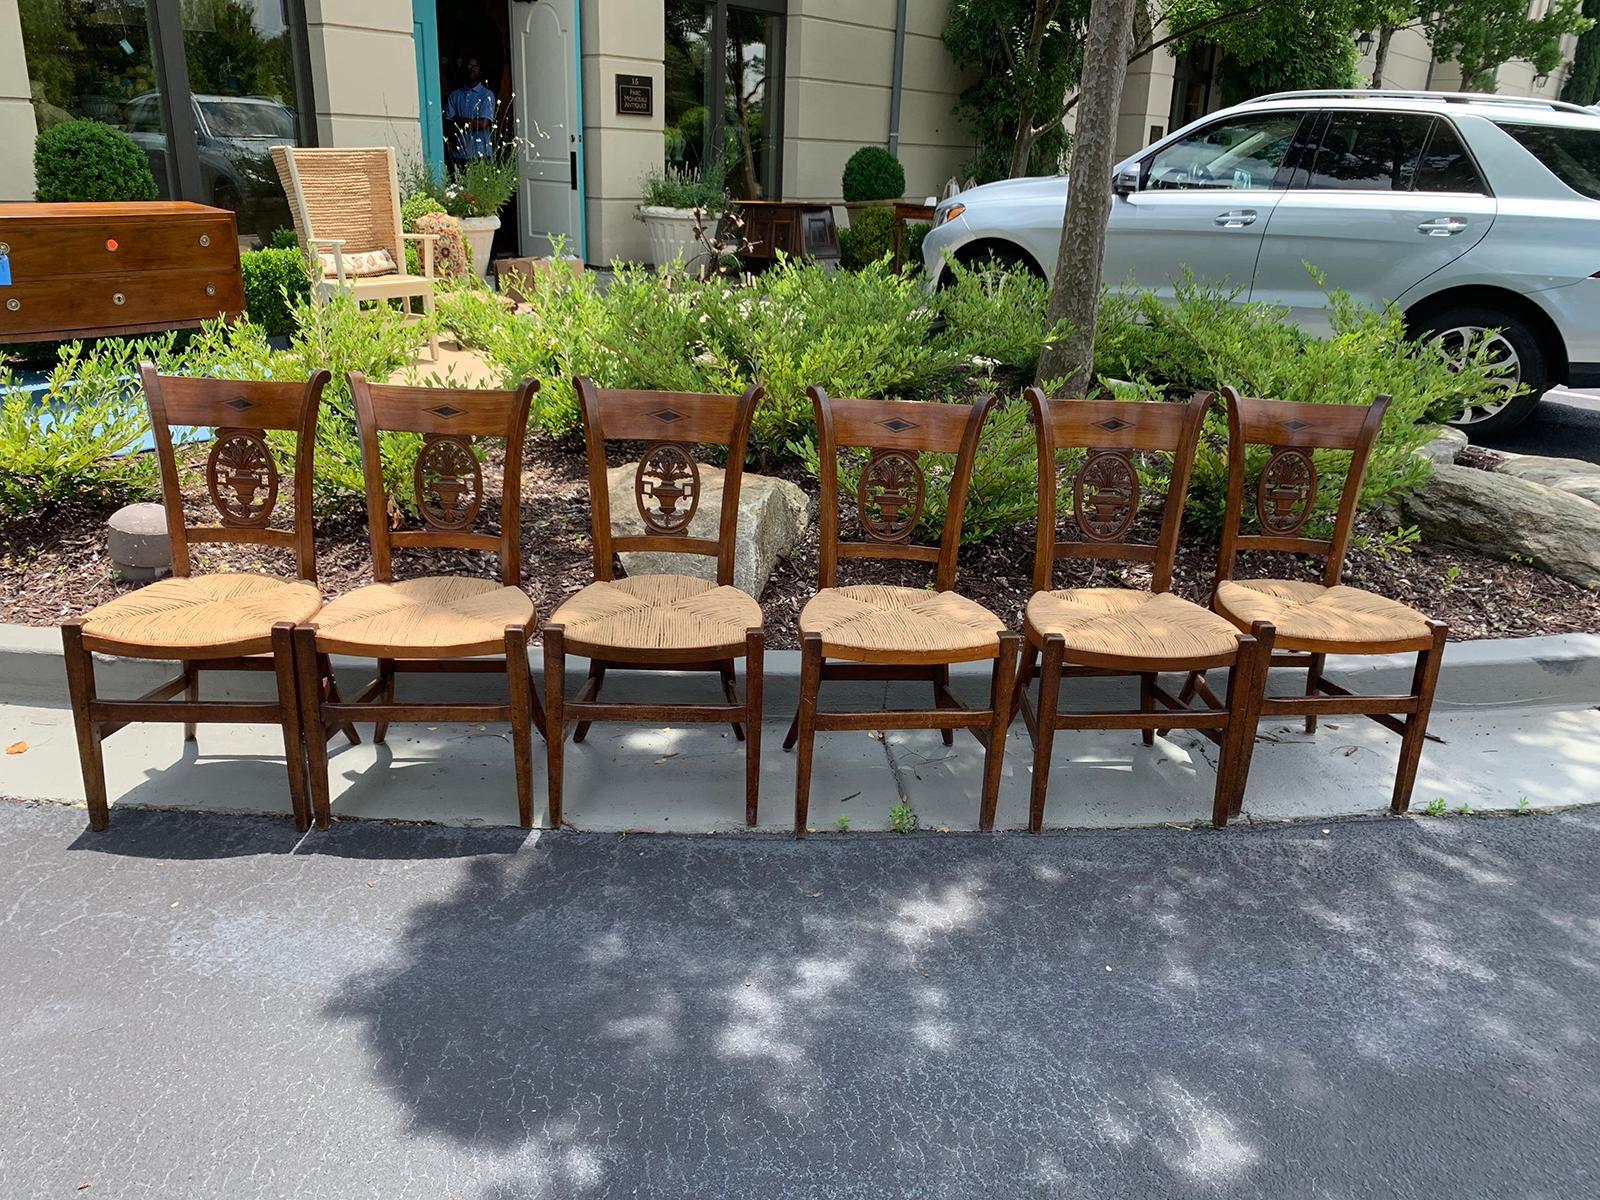 Set of six 19th-20th century French country side chairs with rush seats
Beautiful carving.
Measures: 17.75